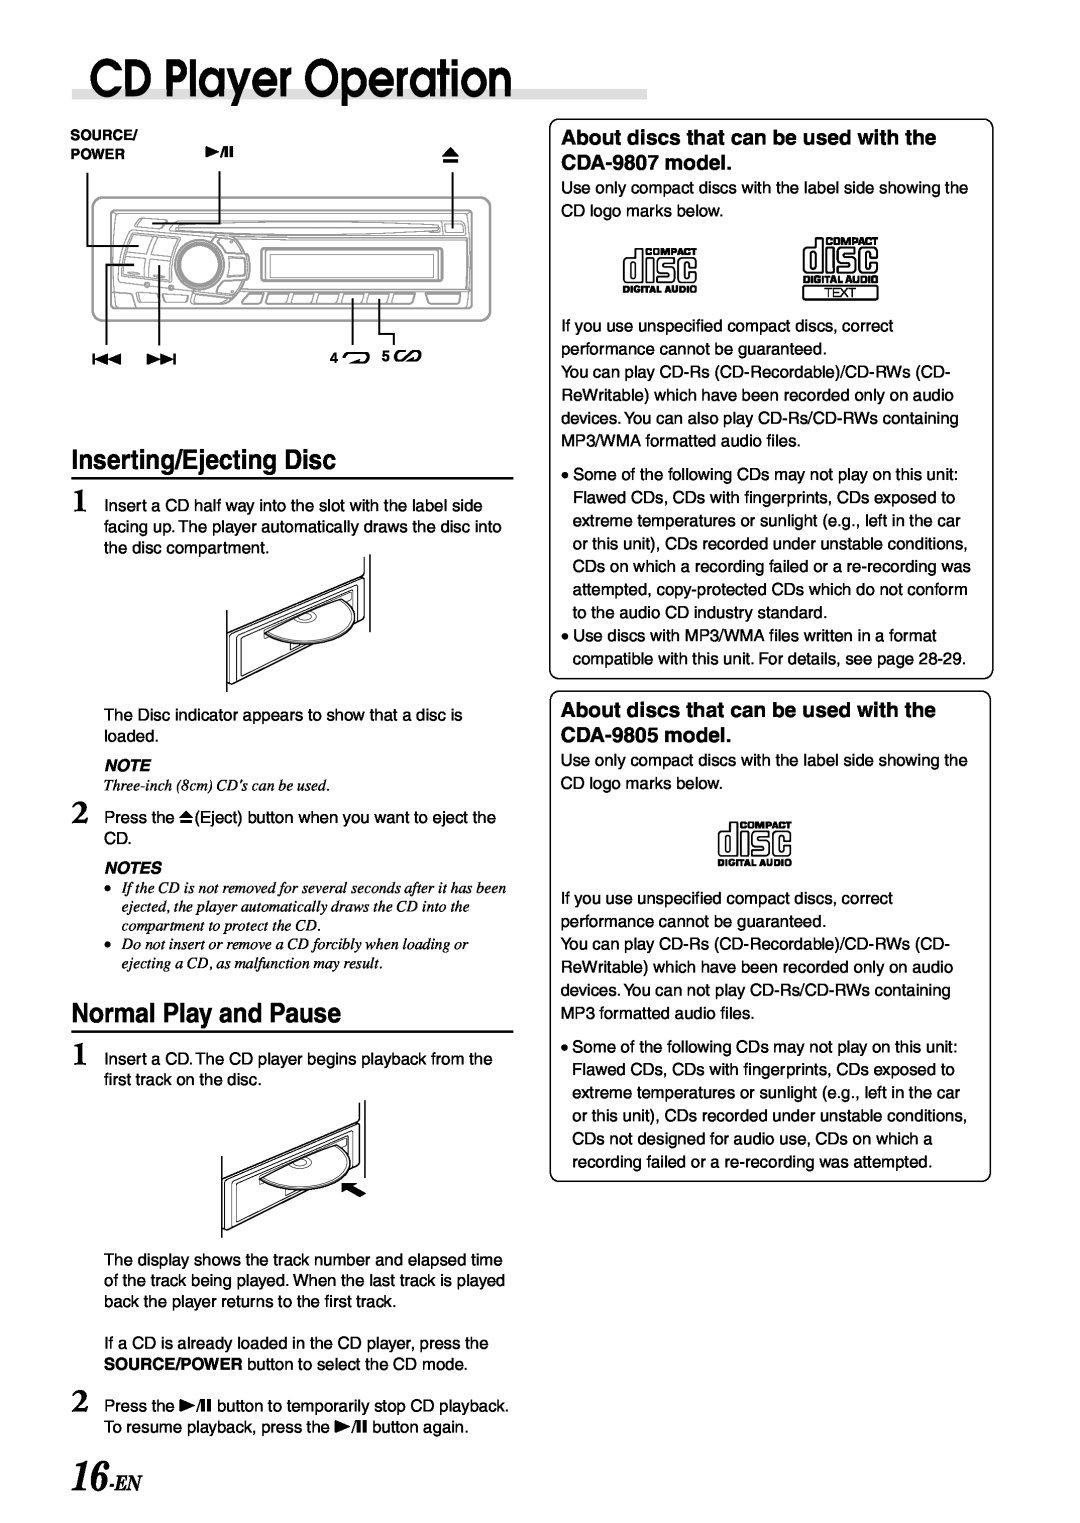 Alpine CDA-9807, cda-9805 owner manual CD Player Operation, Inserting/Ejecting Disc, Normal Play and Pause, 16-EN 